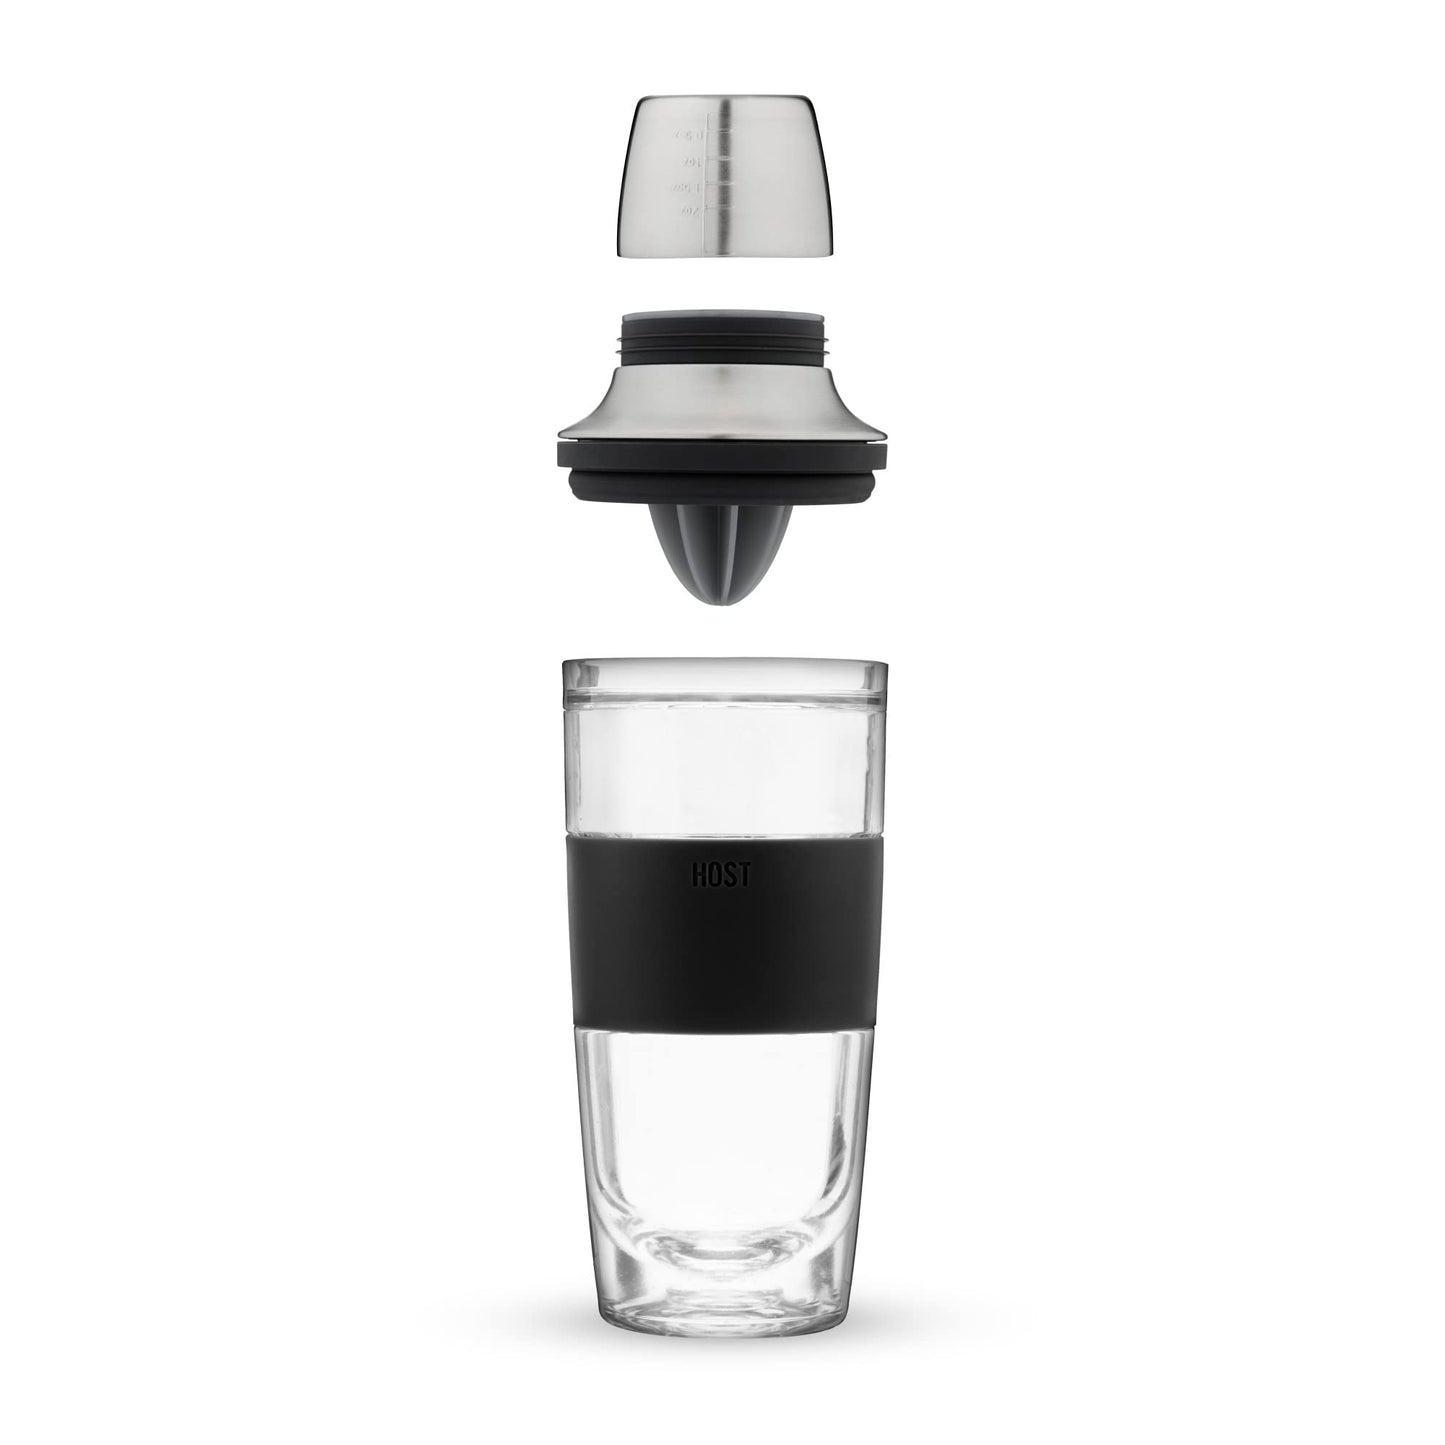 HOST Cocktail Shaker FREEZE Double-Walled Cup with Citrus Reamer, Stainless Steel Jigger Cap, Strainer, and Active Cooling Gel, Black 20 Oz 3-Piece Bar Set,Gray